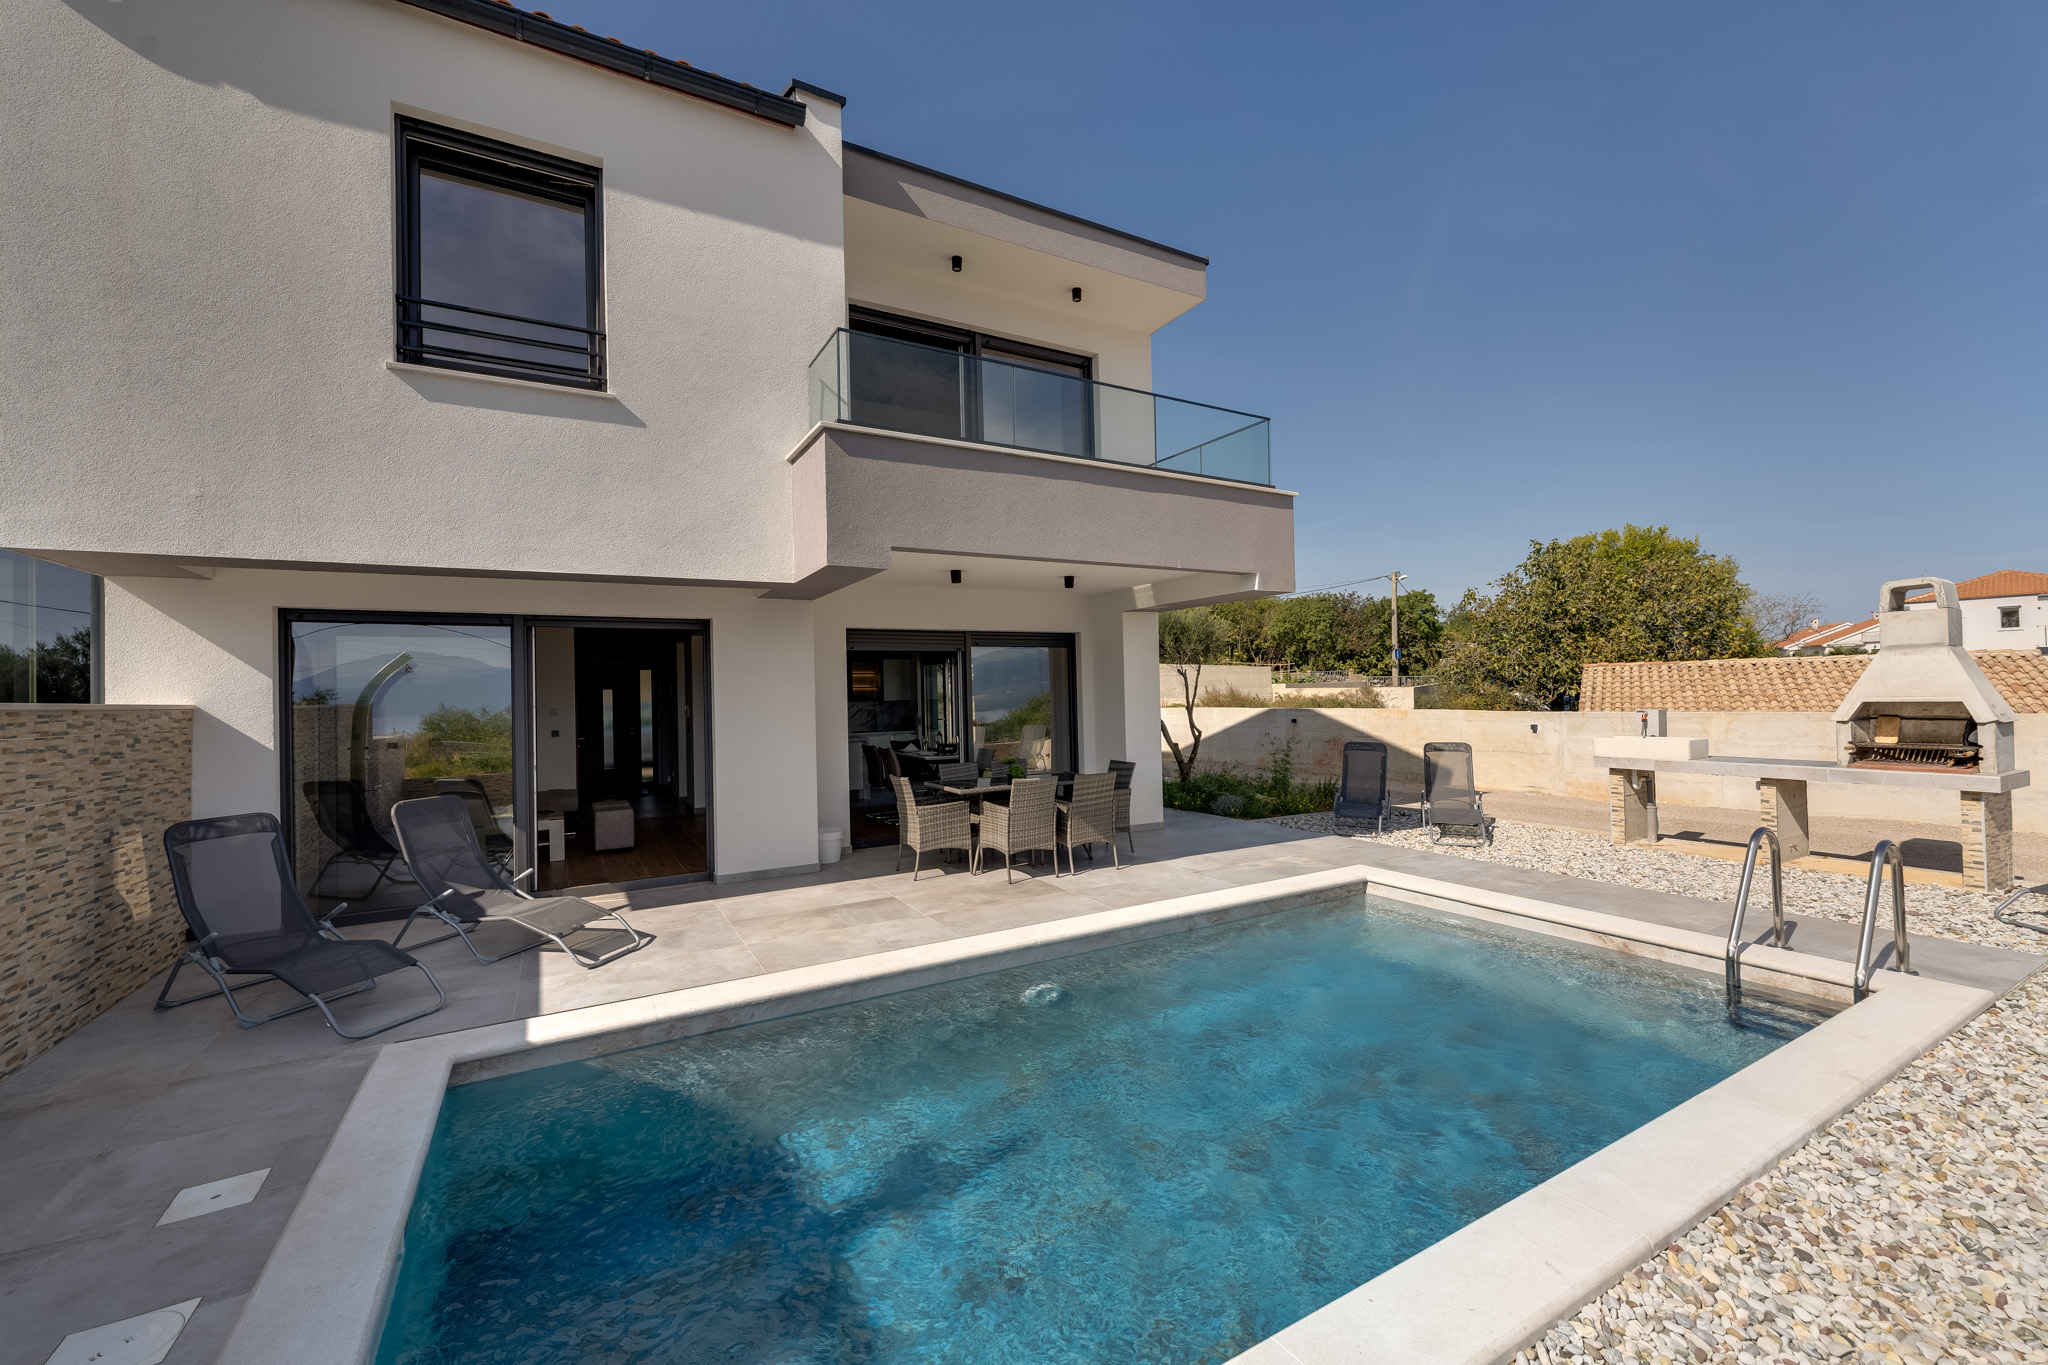 Villa Rosemary - pool and a panoramic view, close to a sandy beach